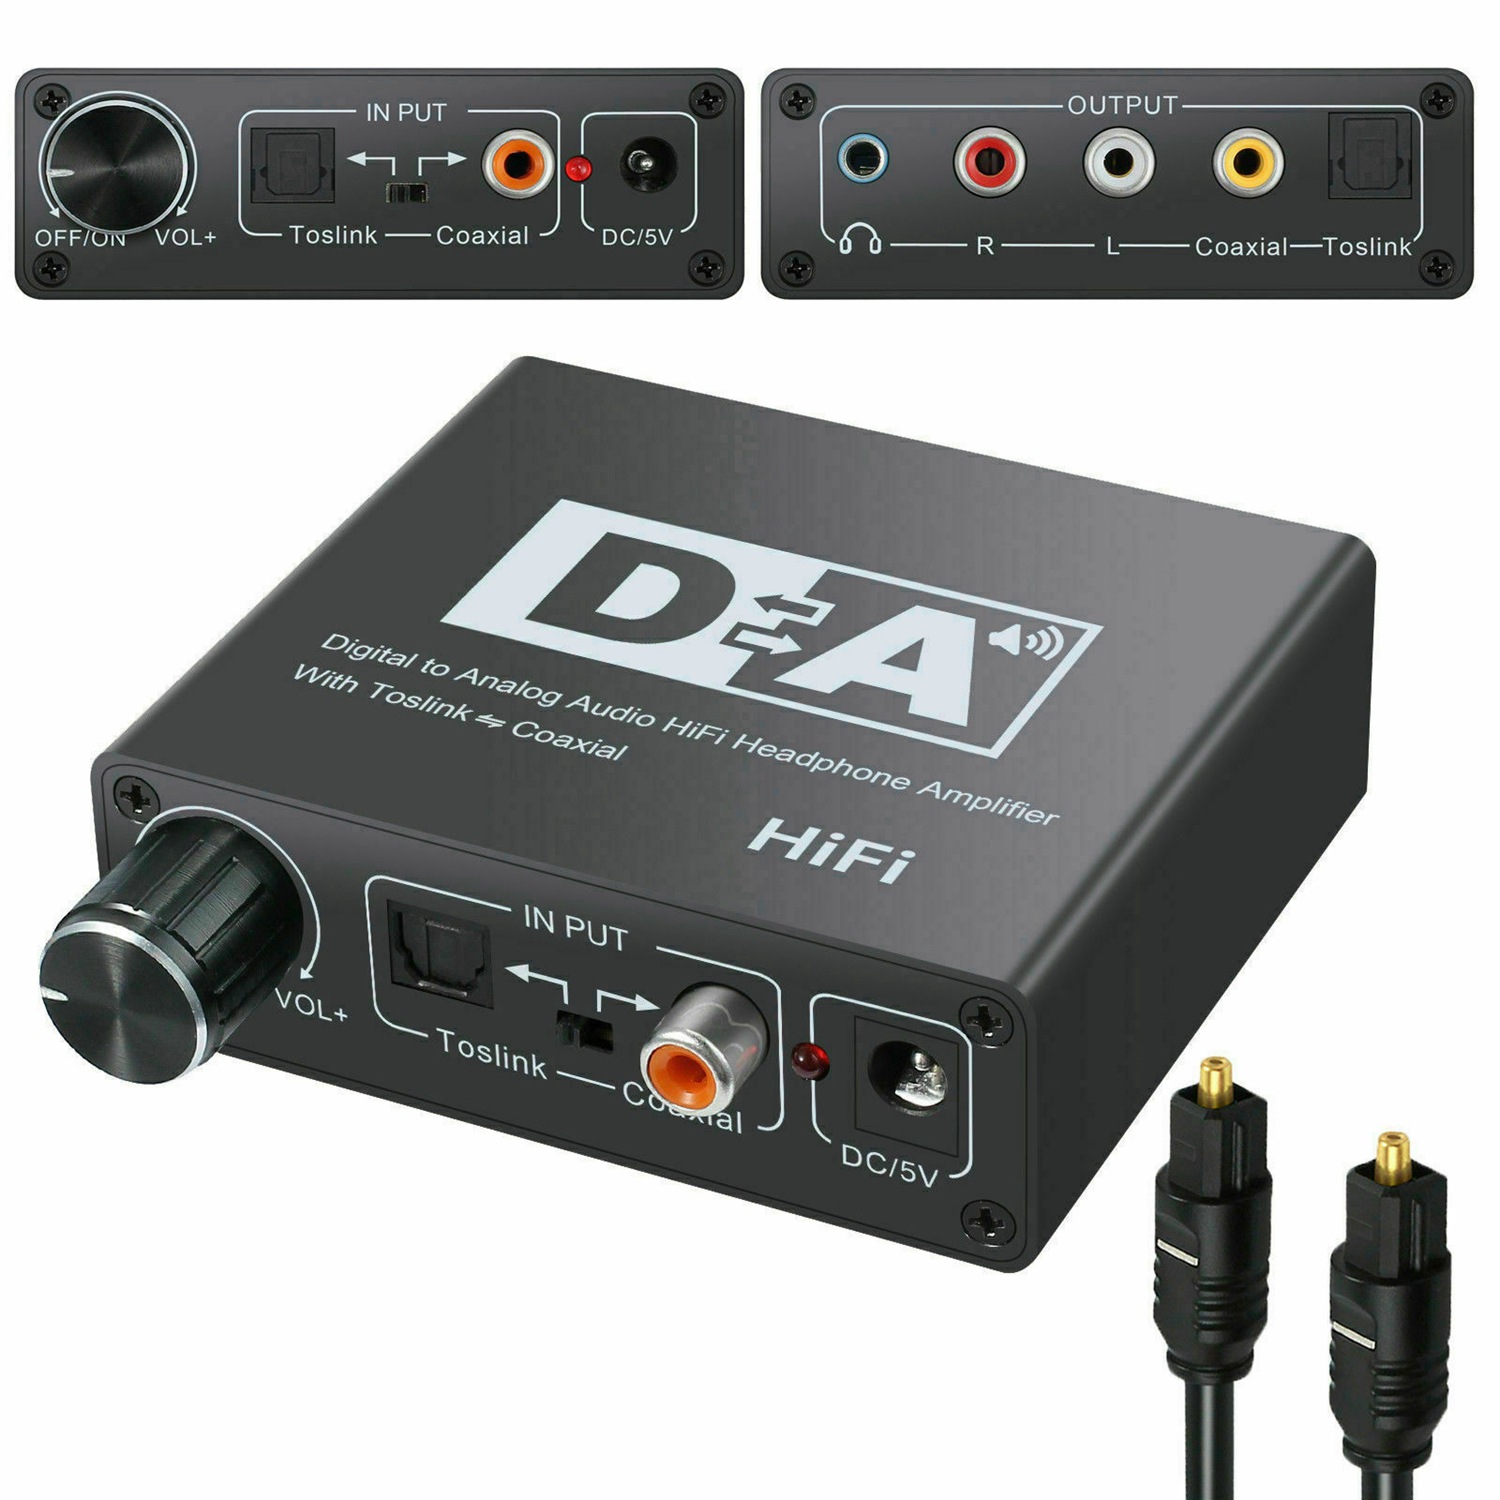 192KHz Digital Optical Coaxial Toslink to Analog RCA 3.5mm Audio Hifi Converter with Spdif - image 2 of 5